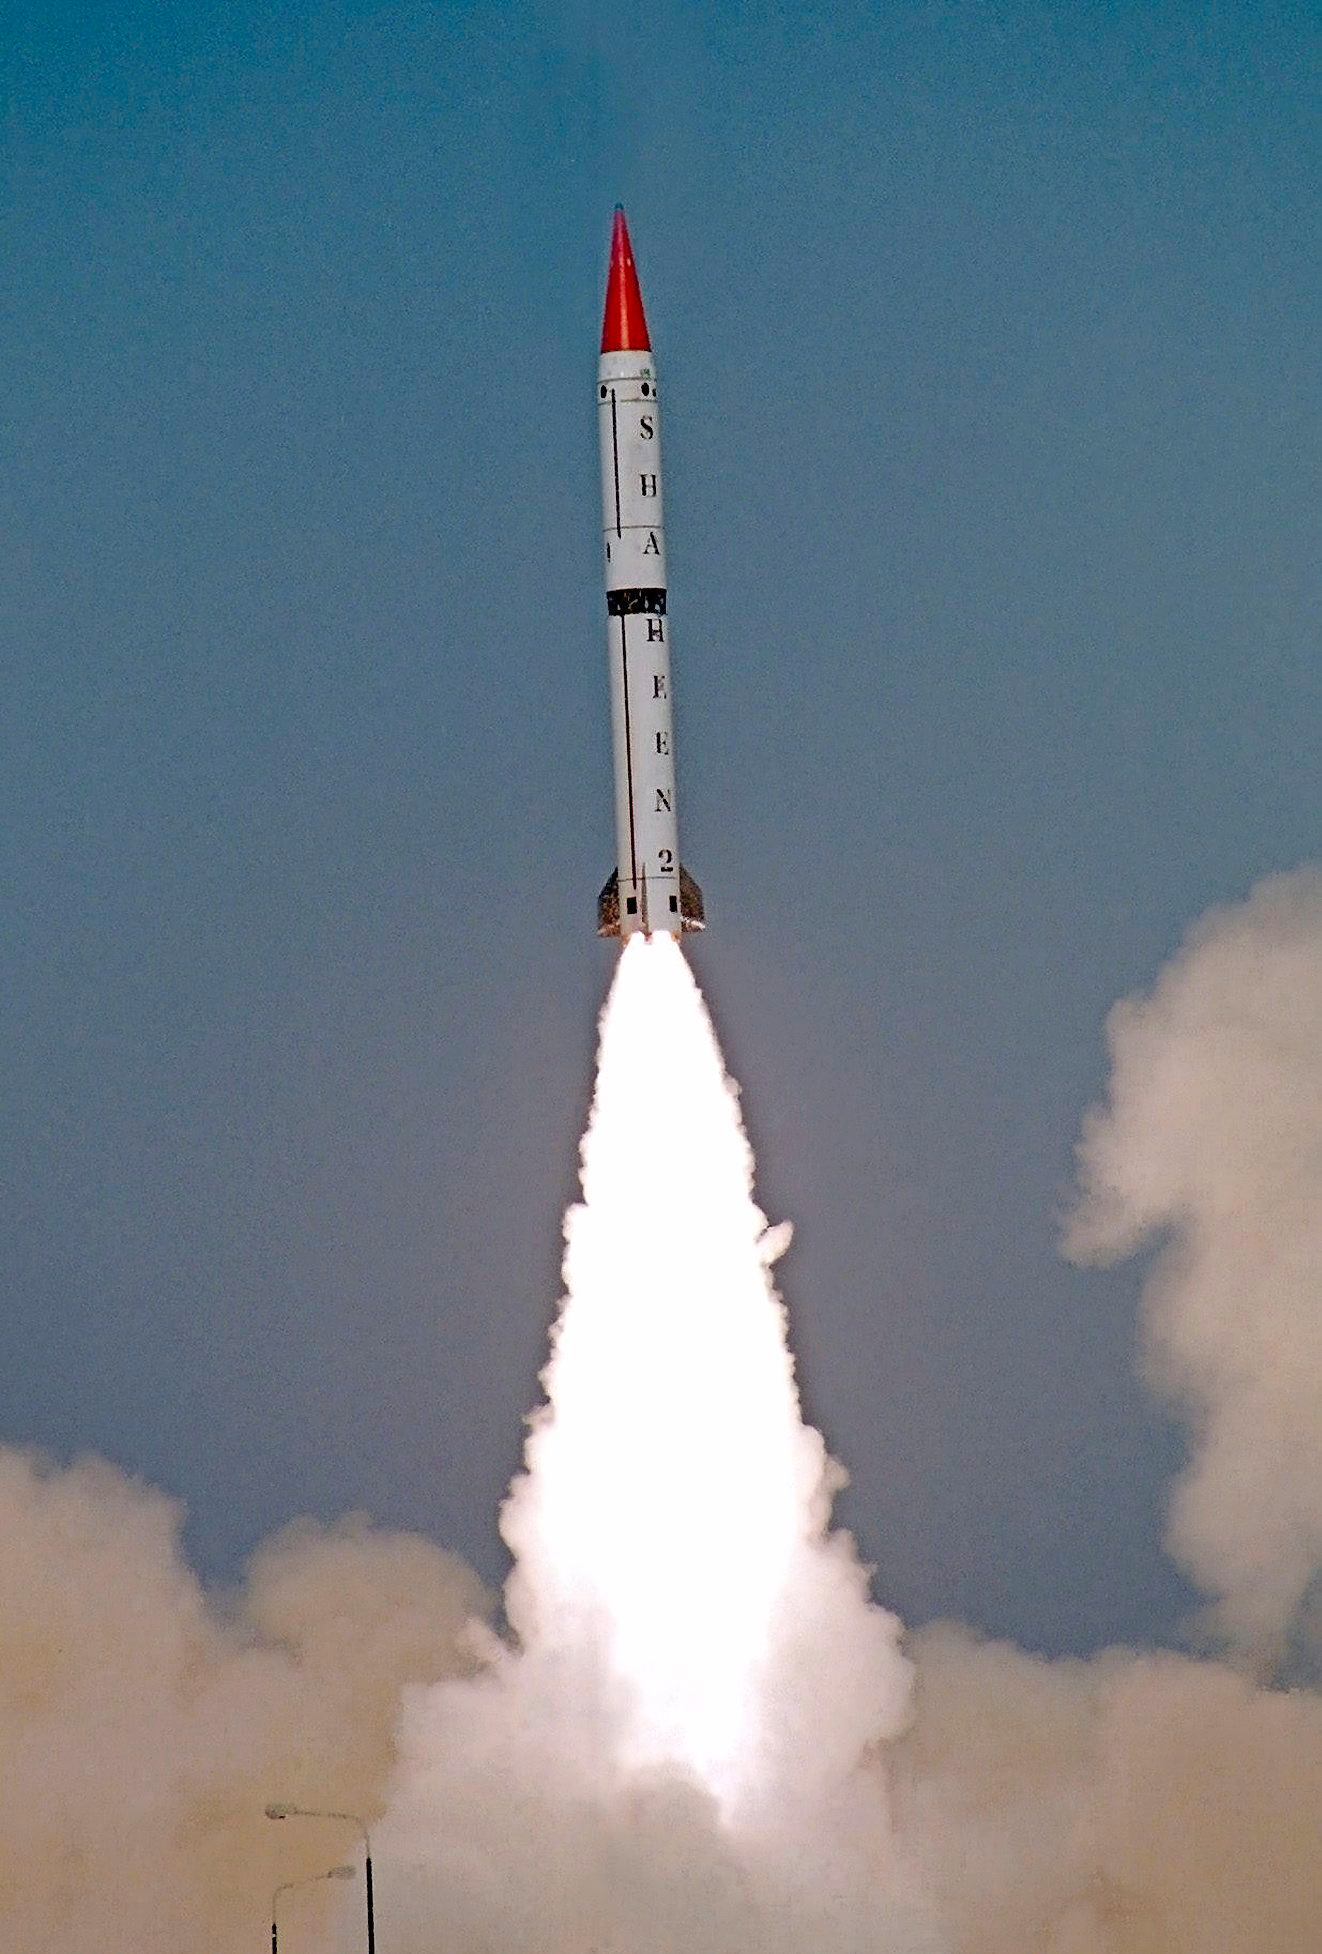 In this handout photo released by Pakistan Interservices Public Realtions department, shown is the test flight of the Pakistan-made new version of its long-range nuclear-capable missile at an  undisclosed location in Pakistan, Friday, Feb. 23, 2007. The Hatf VI (Shaheen II) ballistic missile has a range of 2,000 kilometers (1,245 miles). (KEYSTONE/AP Photo/Interservices Public Realtions Department,HO) Pakistan Missile Test